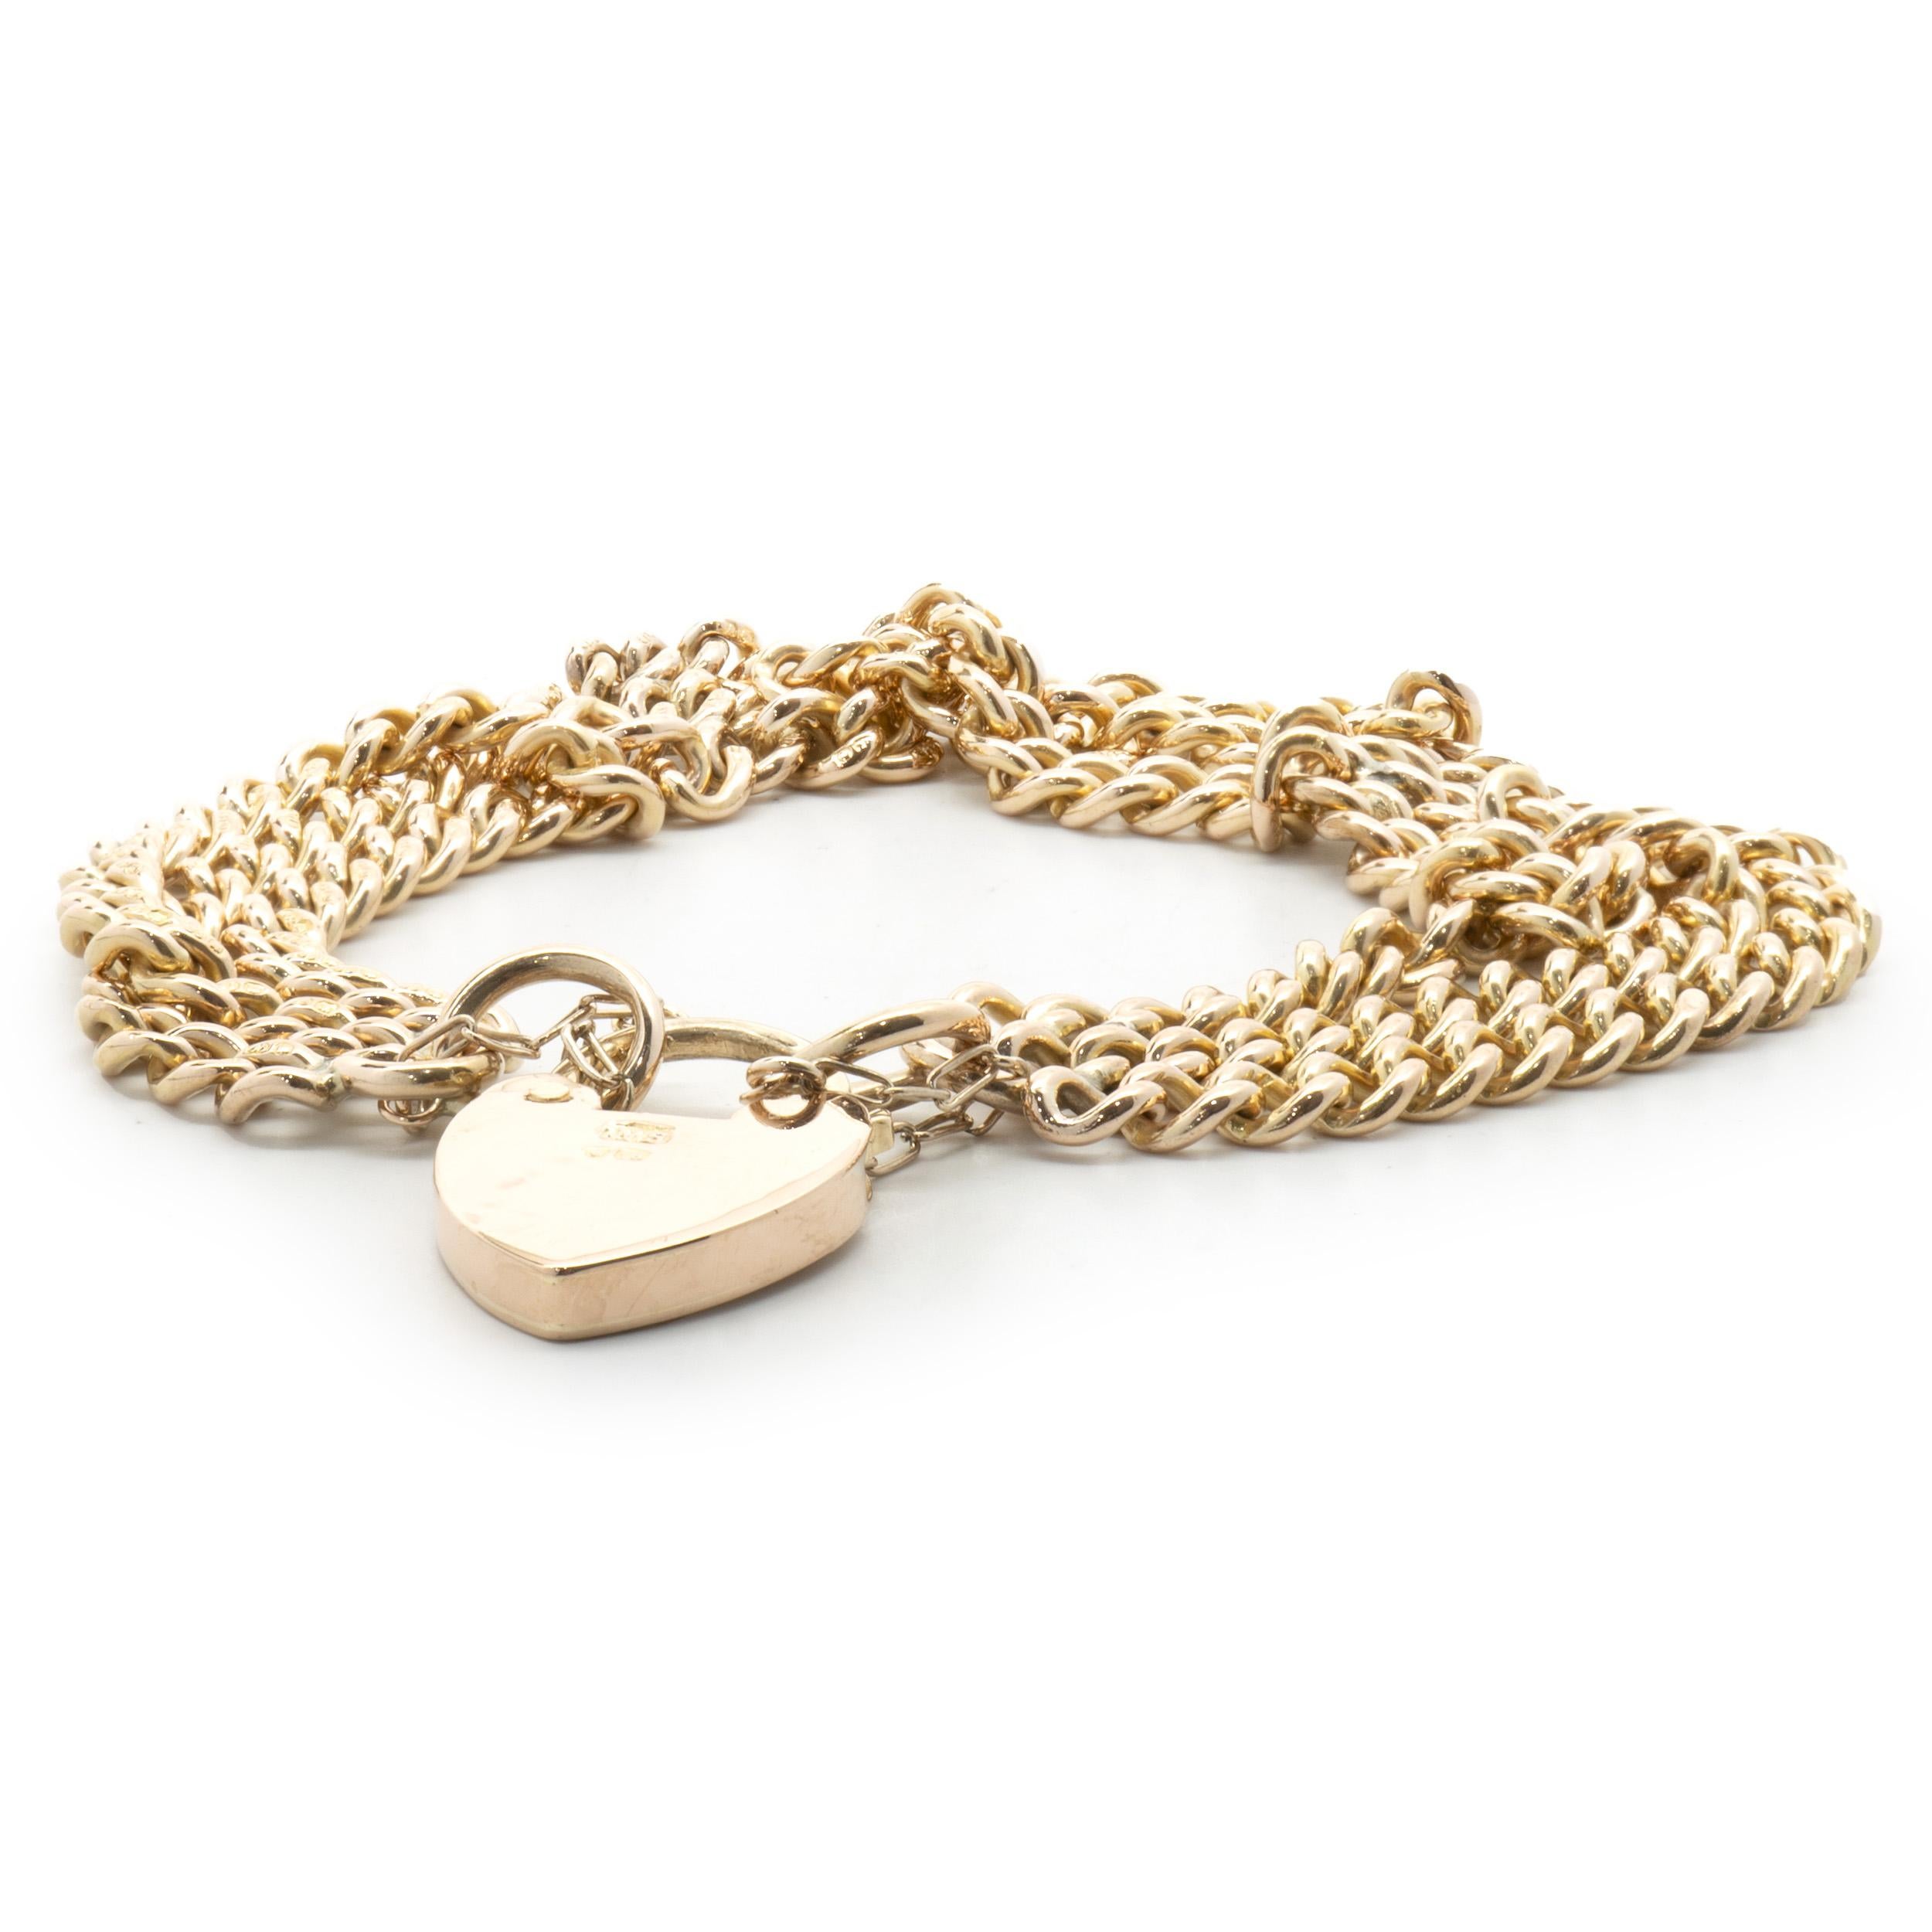 Material: 18K yellow gold
Dimensions: bracelet will fit up to a 7.75-inch wrist
Weight: 44.19 grams
